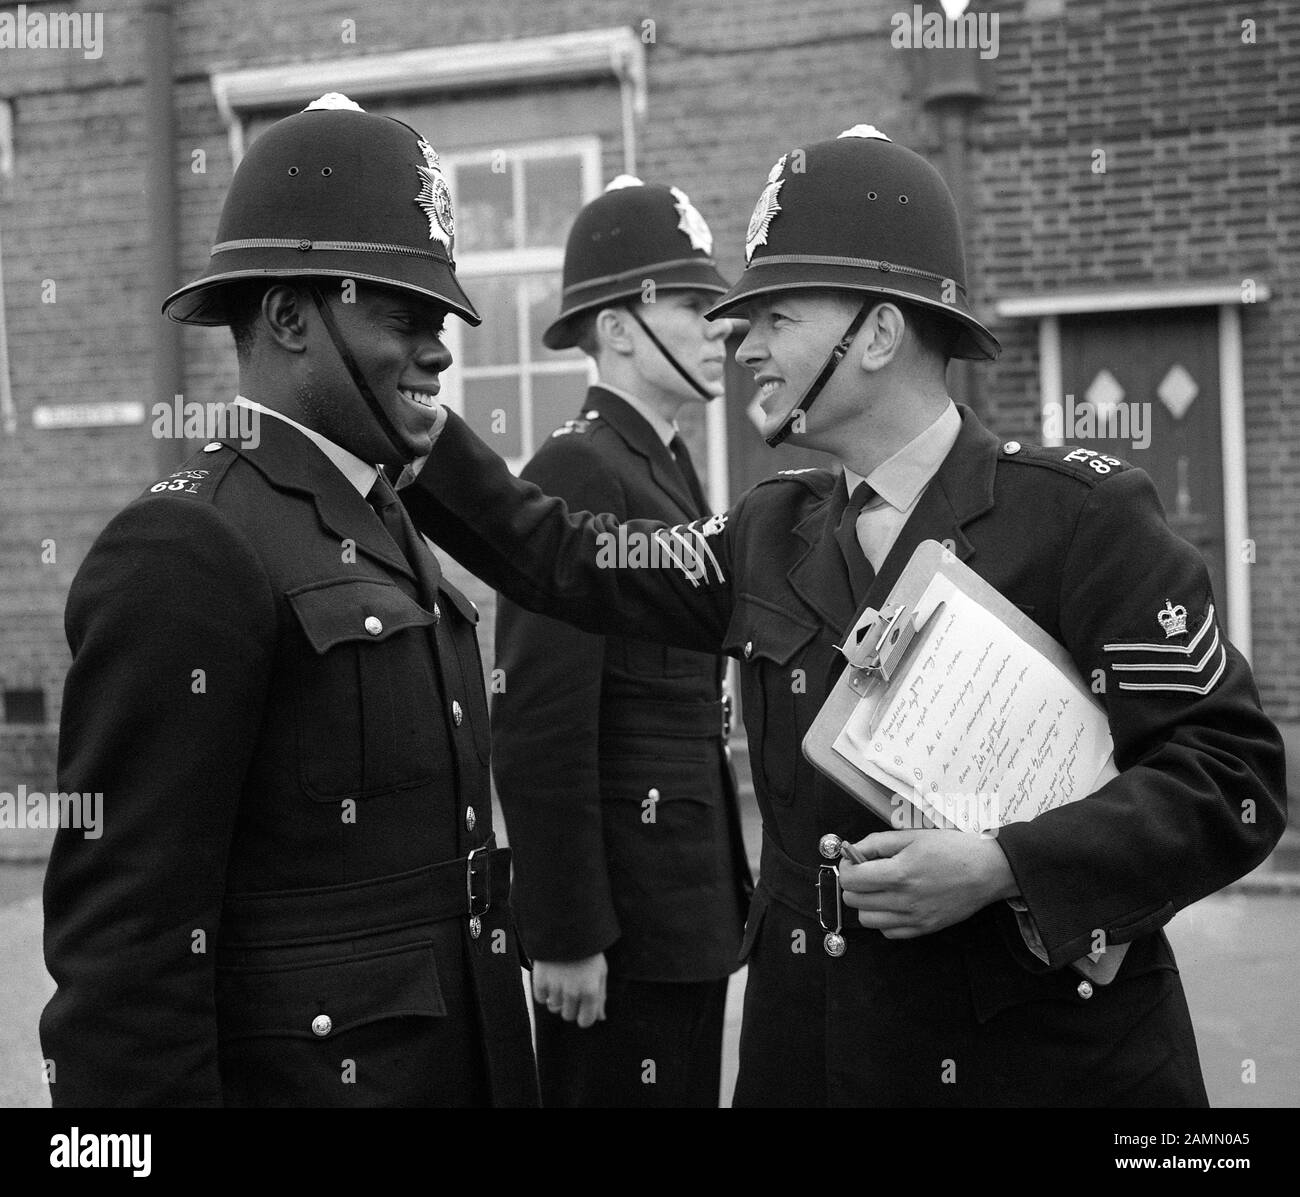 Undergoing nine days training as London's first black policeman, PC Norwell Gumbs, 21, at the Metropolitan Police Training College in Hendon, London, as Station Sgt John Aldridge instructs him in the correct way to wear his helmet. Stock Photo